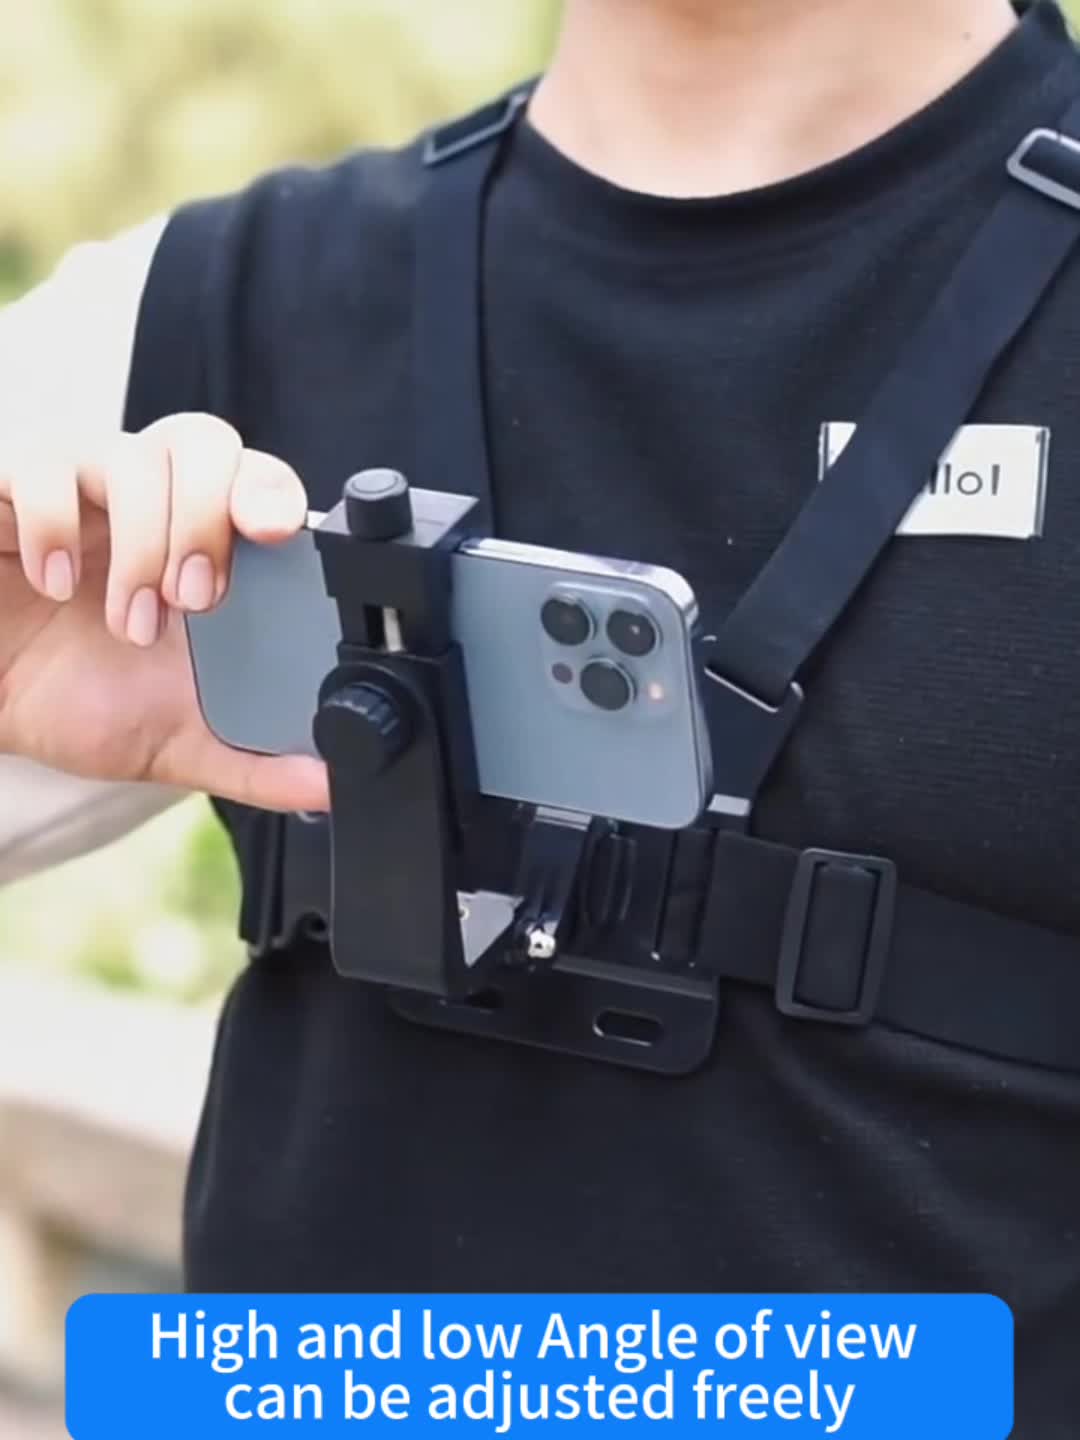  Chest Mount for Phone and Action Camera,Chesty Vest Harness  Strap Holder Compatible with iPhone Samsung GoPro Hero DJI OSMO AKASO :  Electronics